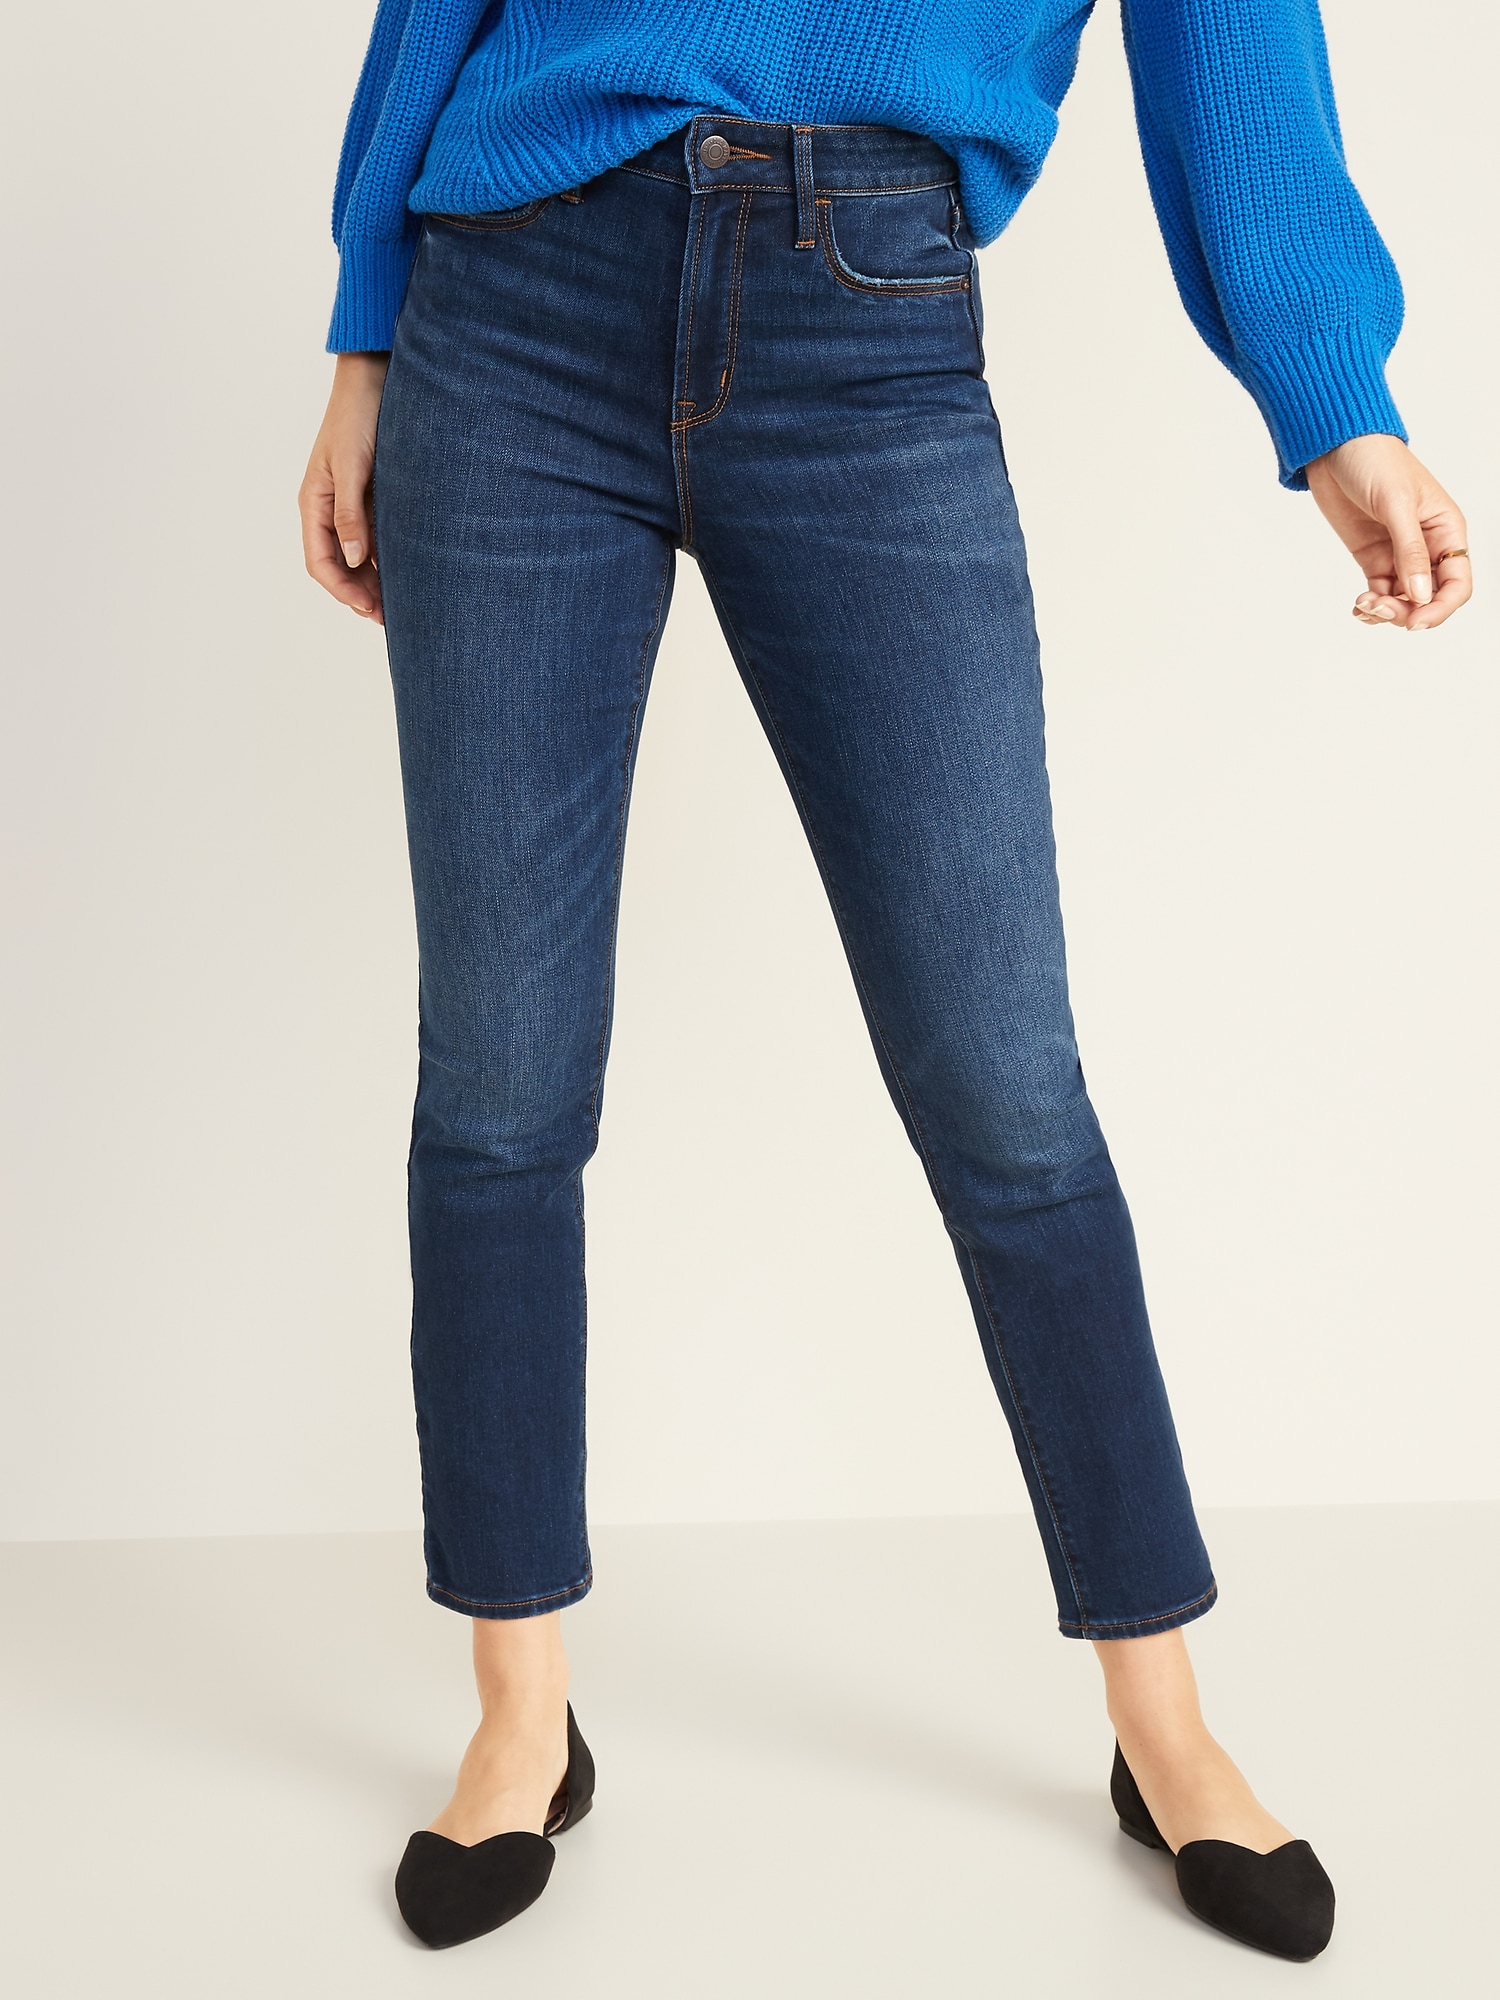 high rise jeans online